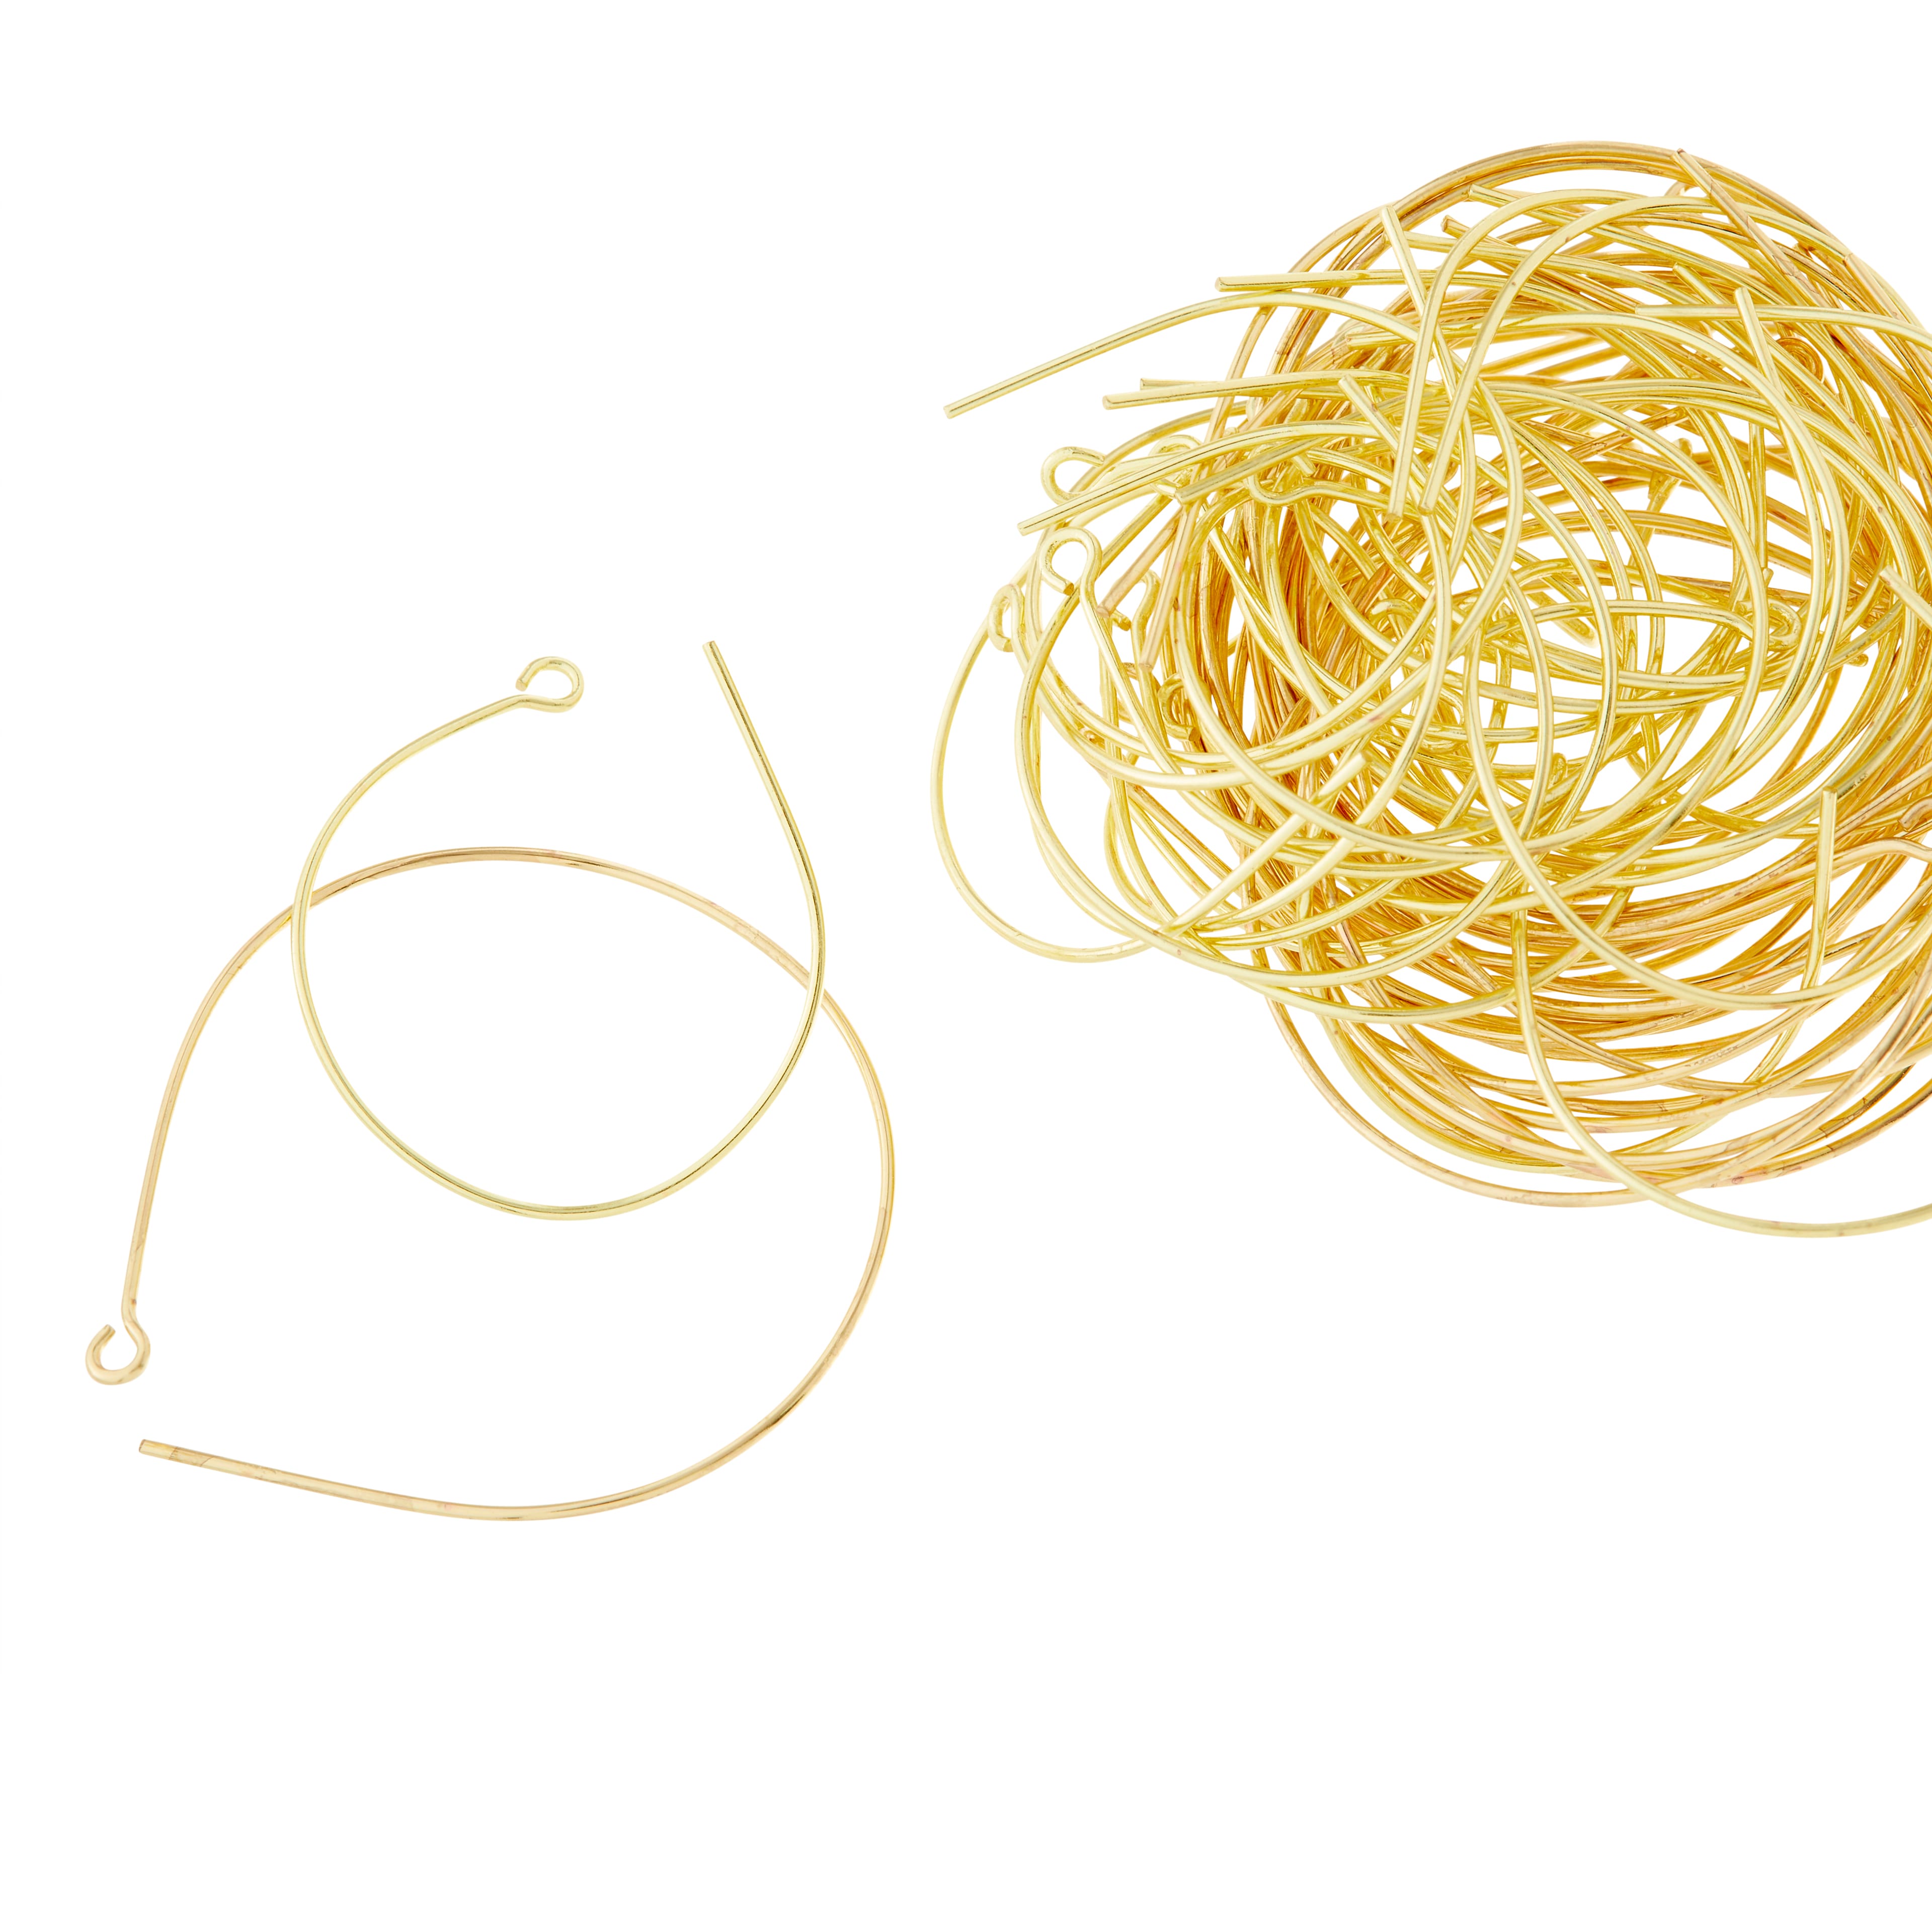 12 Packs: 60 ct. (720 total) Gold Mix Hoop Earring Wires by Bead Landing™